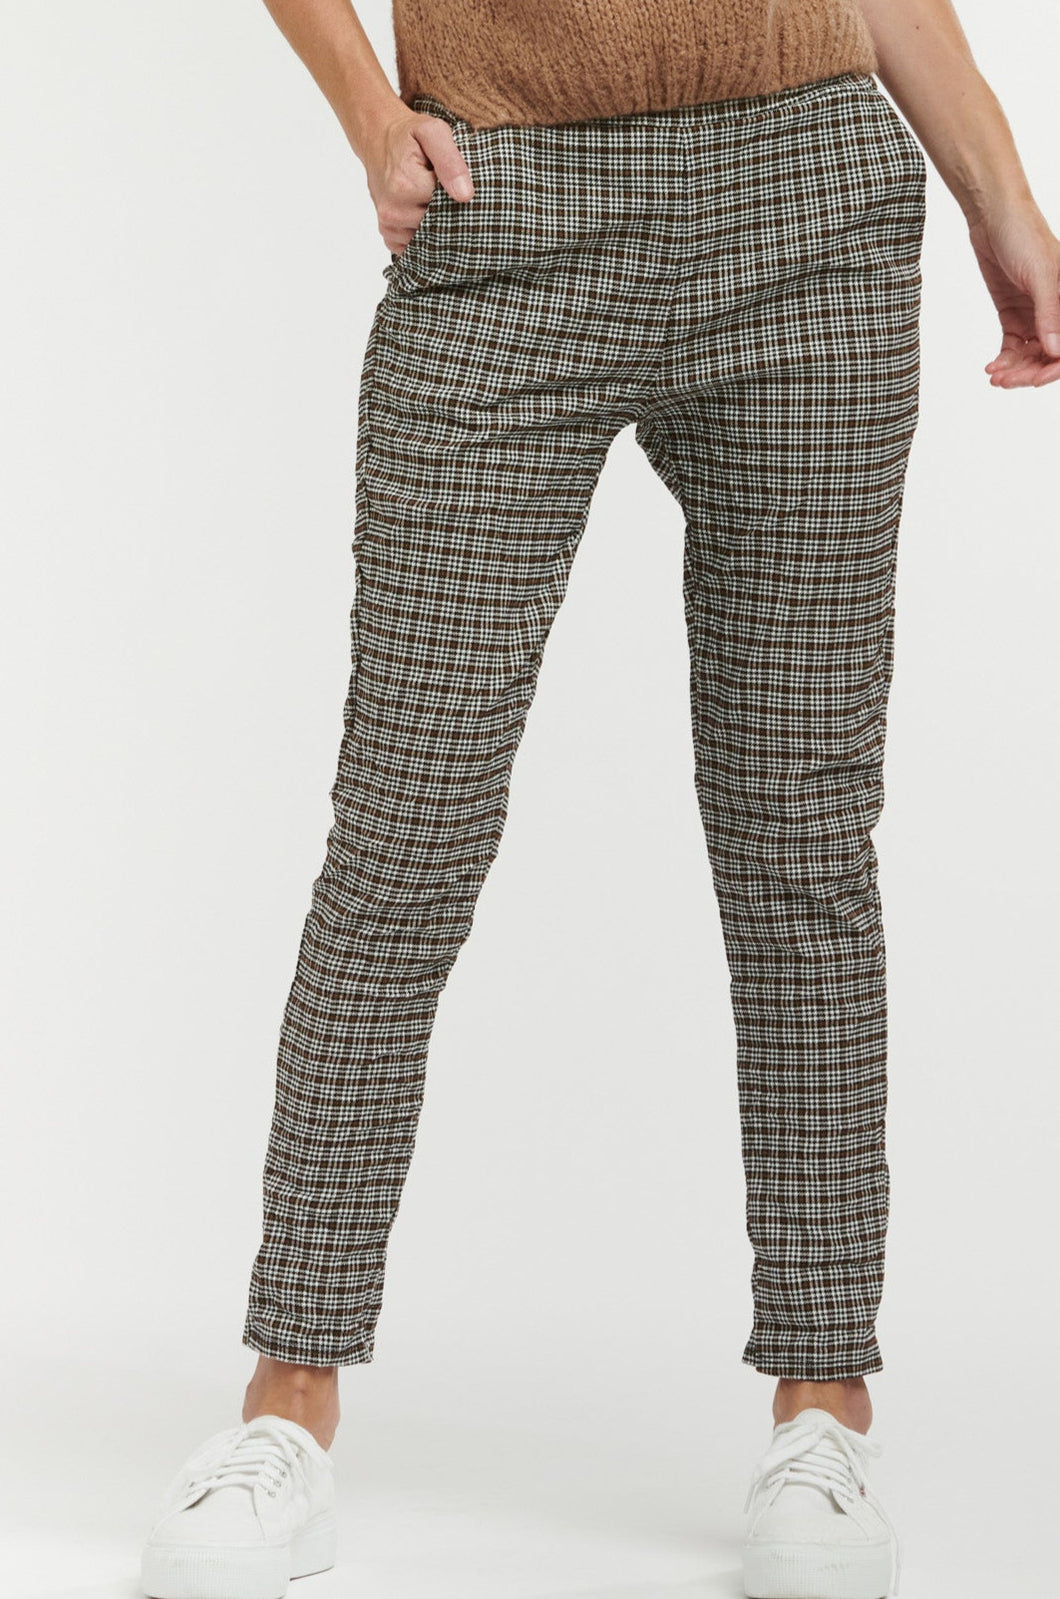 Check Pant in Mini Houndstooth Check